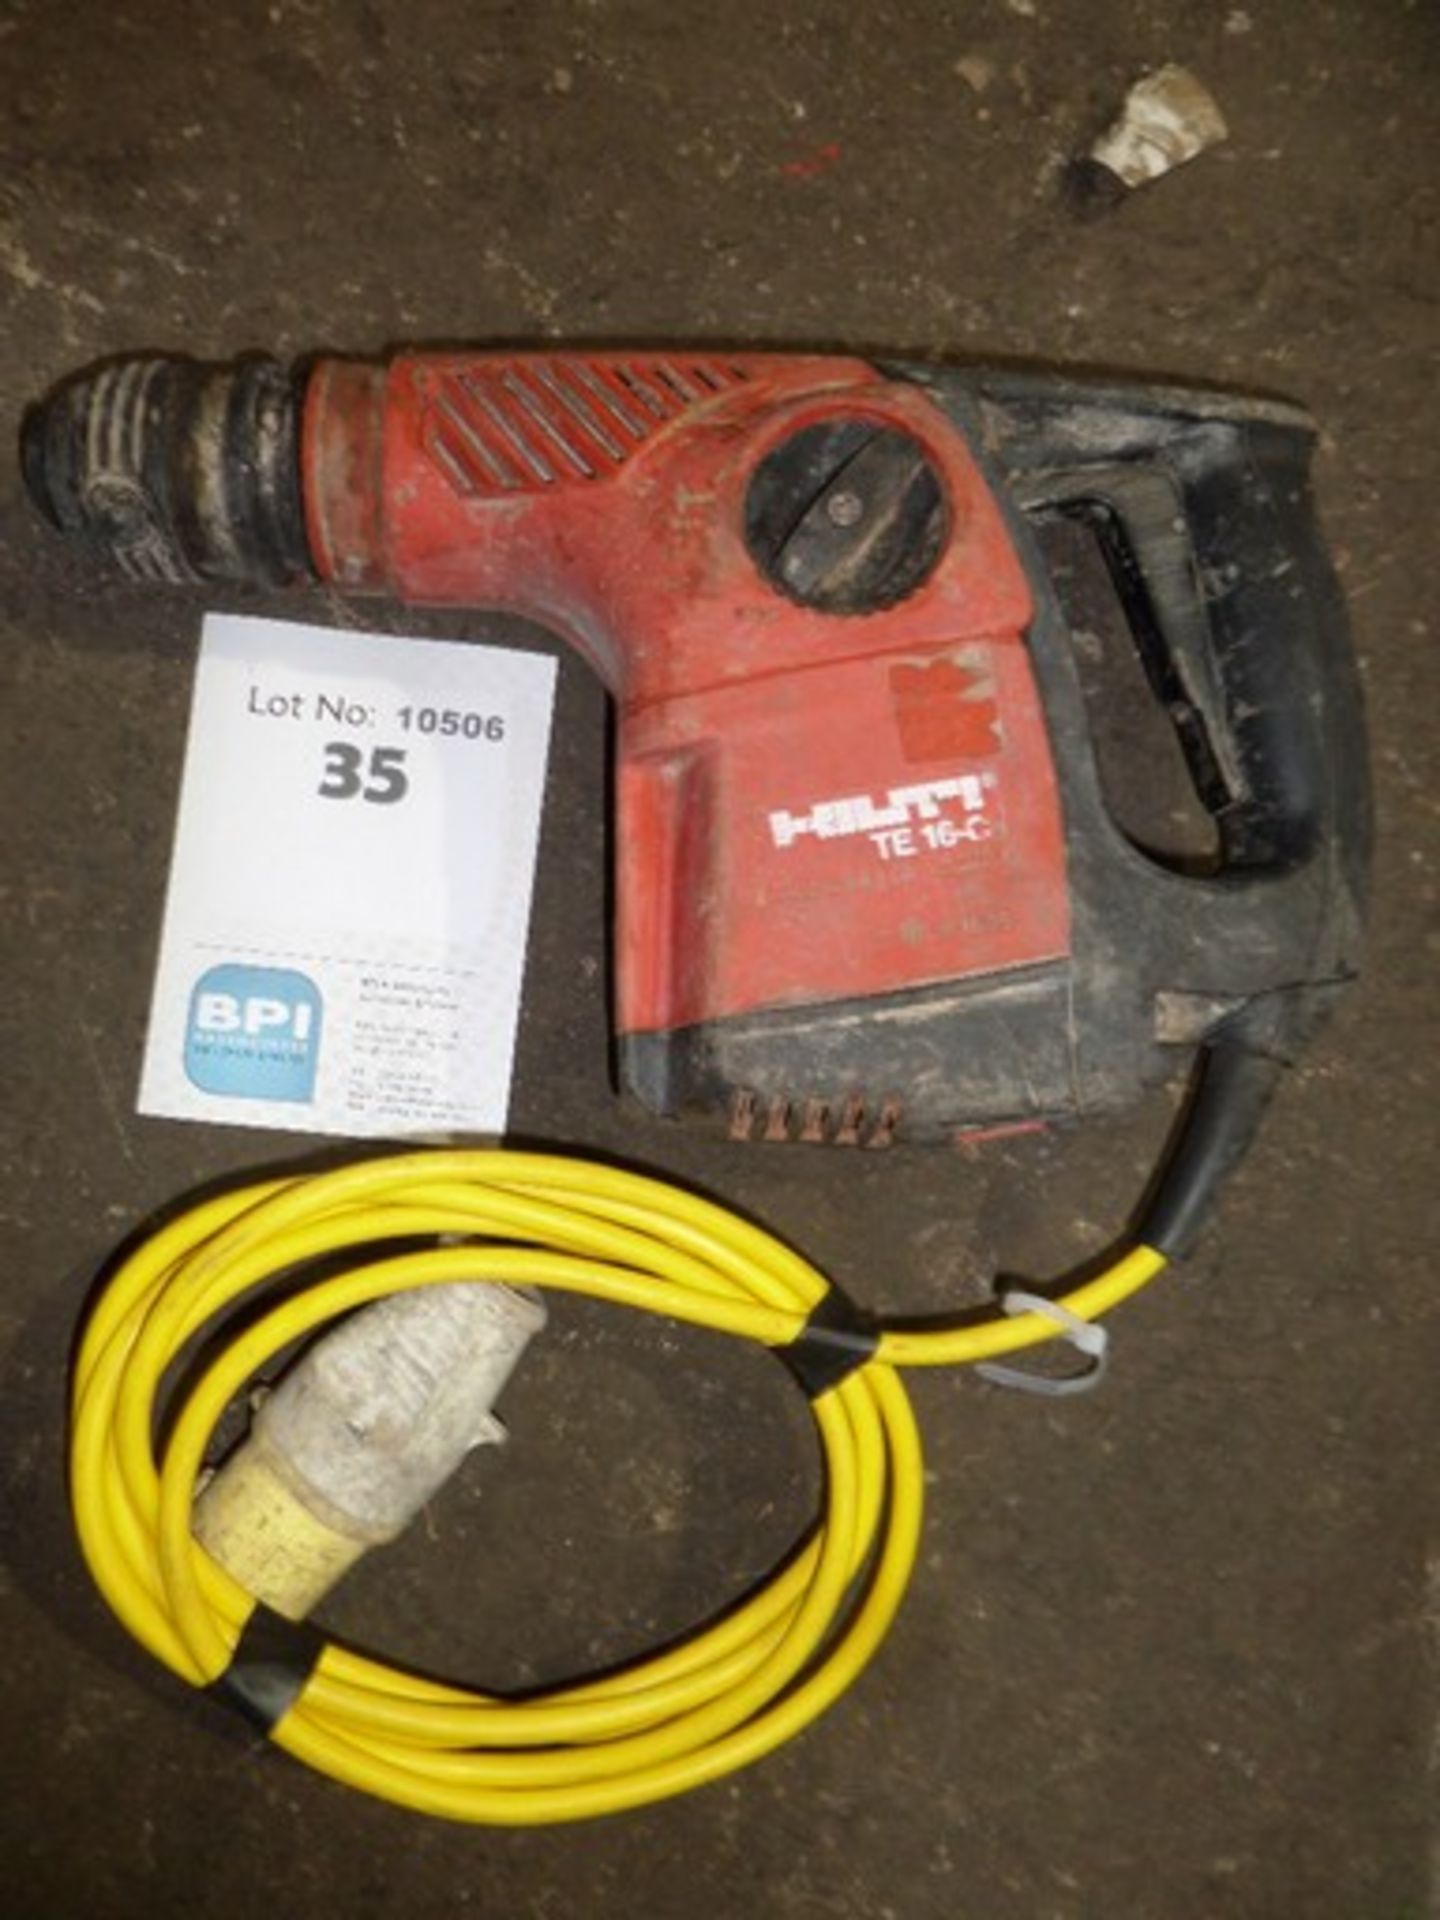 Hilti TE16-C {015179} HAMMER/DRILLER TE30C - 110V 110v 16amp connection and appears to be working